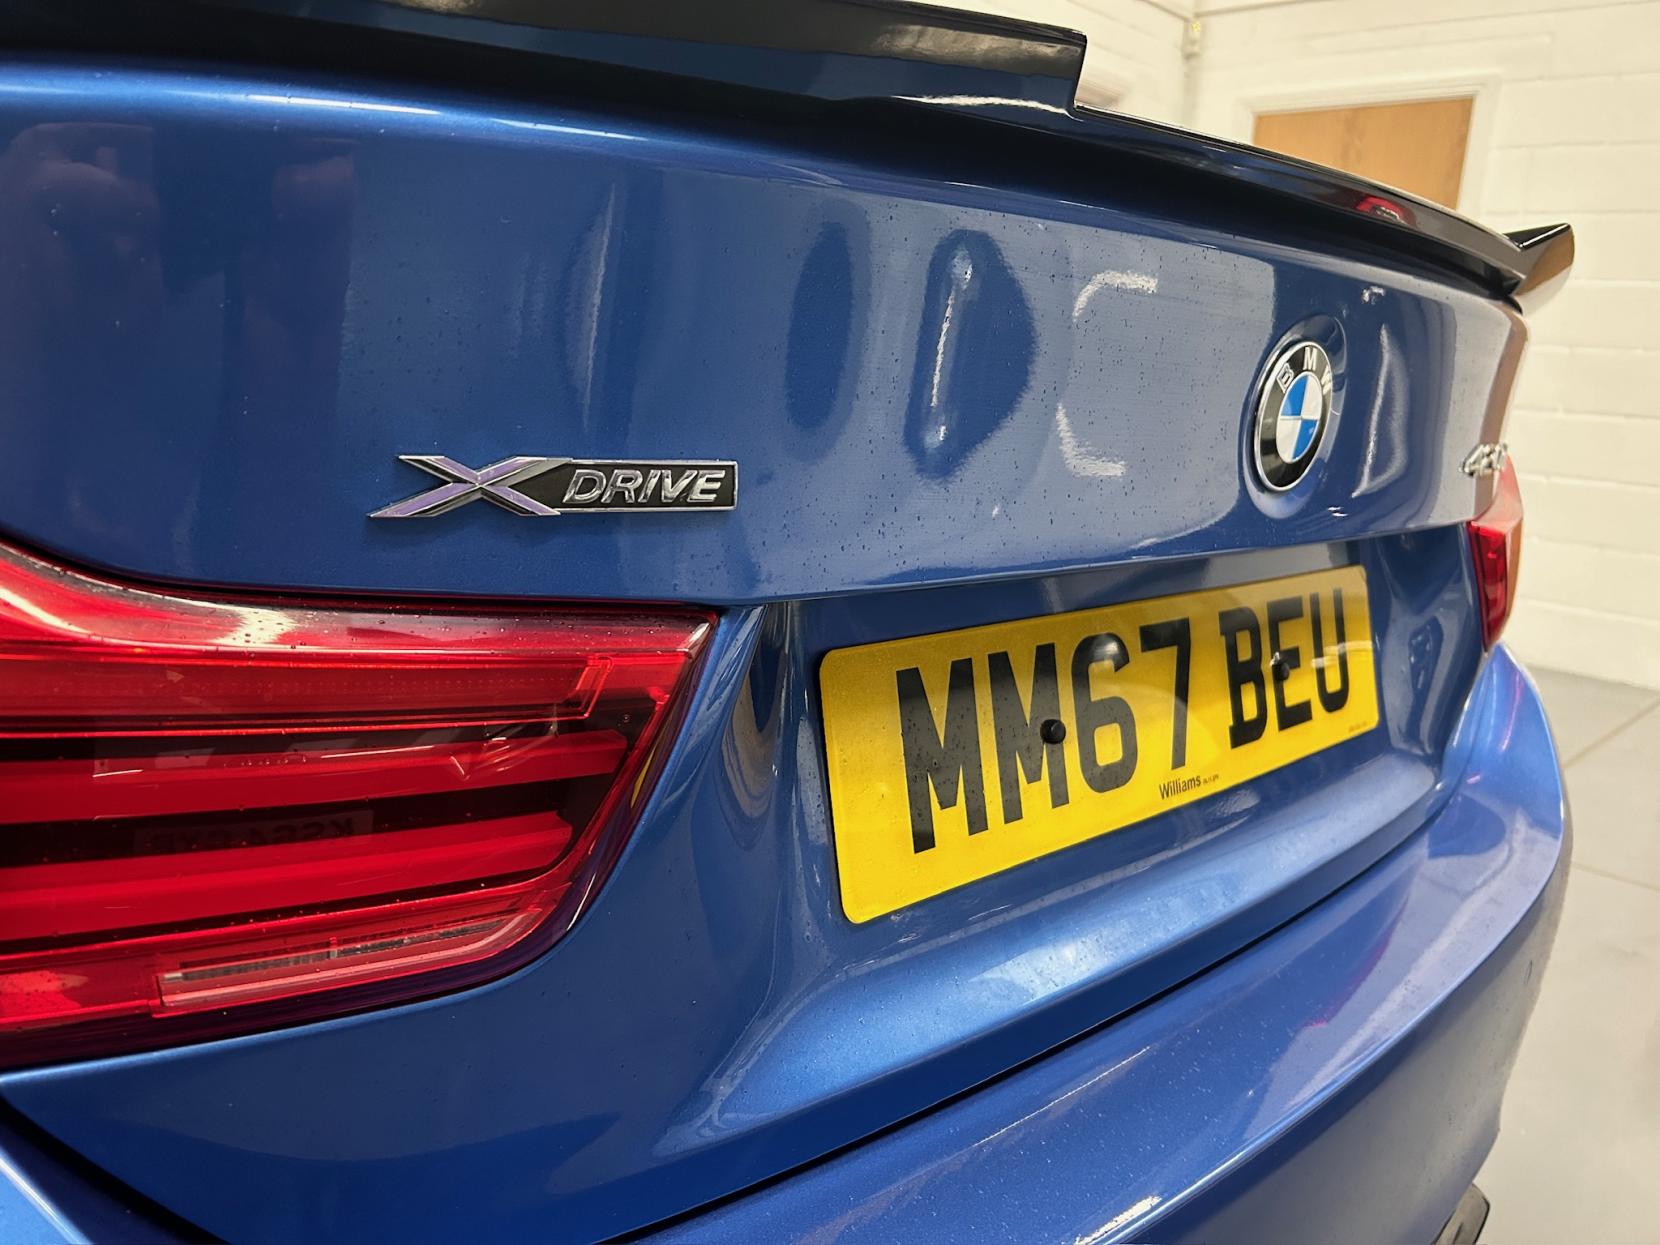 BMW 4 Series 2.0 420d M Sport Coupe 2dr Diesel Auto xDrive Euro 6 (s/s) (190 ps)